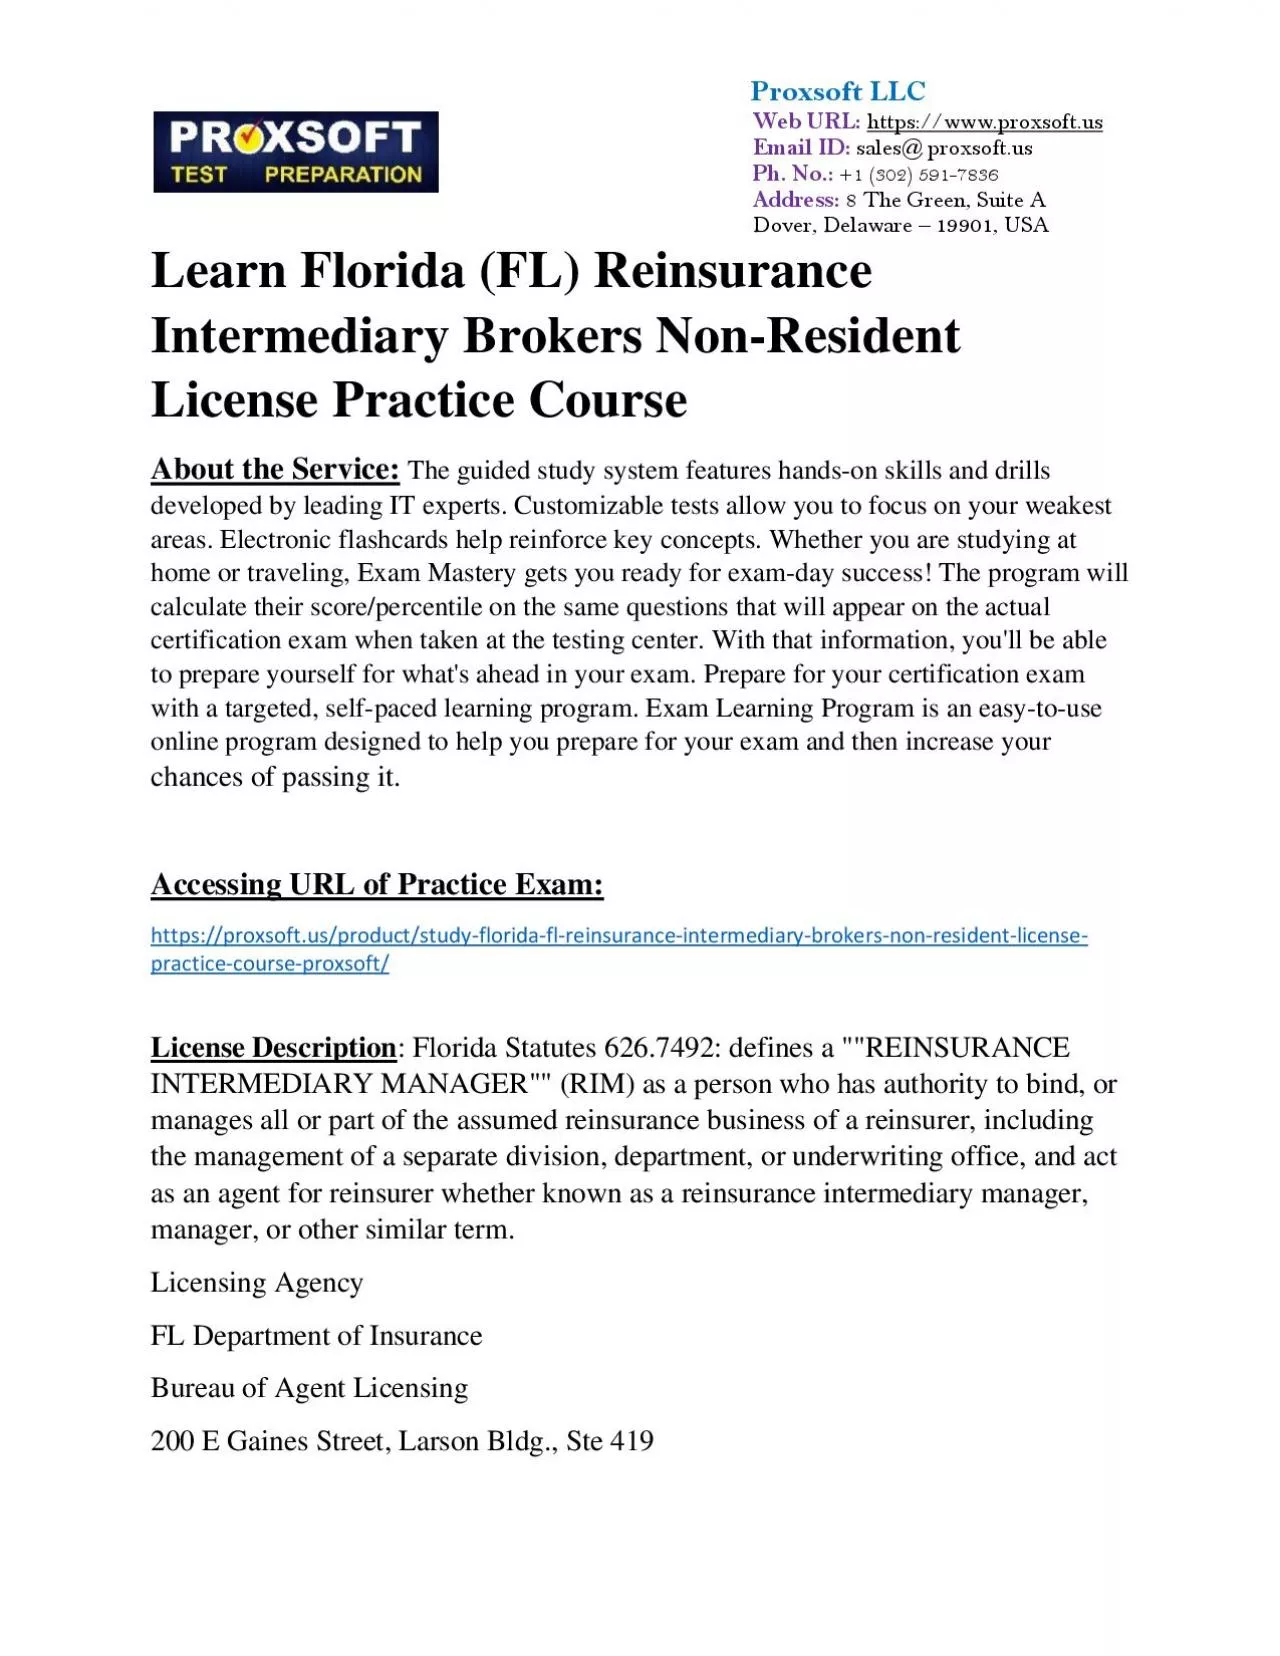 Learn Florida (FL) Reinsurance Intermediary Brokers Non-Resident License Practice Course